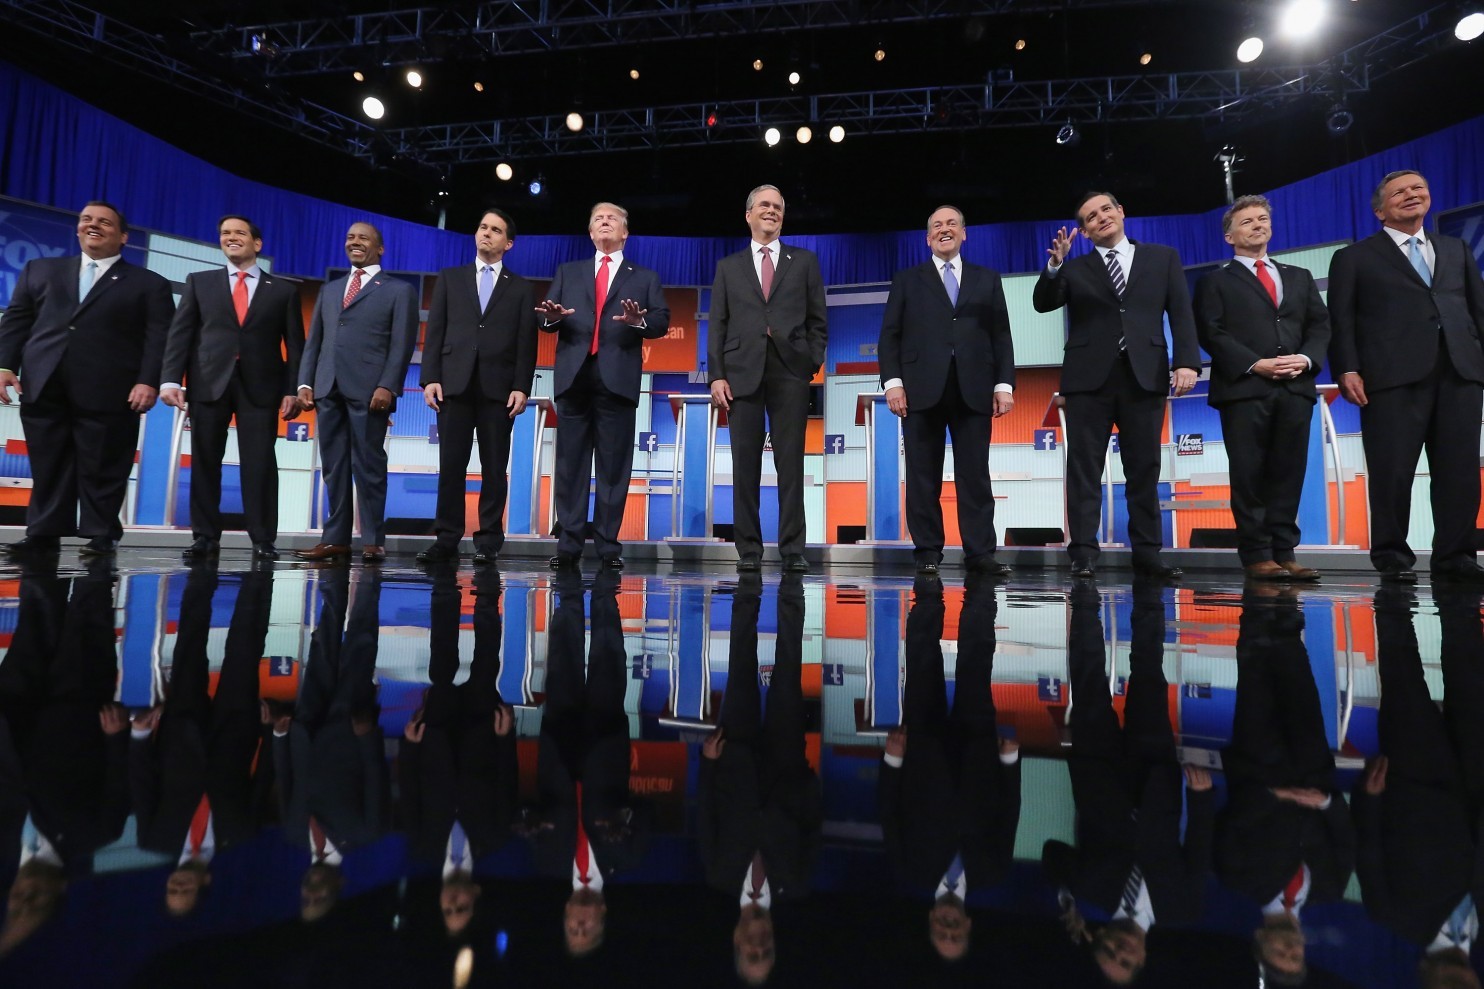 Highlights From The First G.O.P. Debate You Don’t Want To Miss!